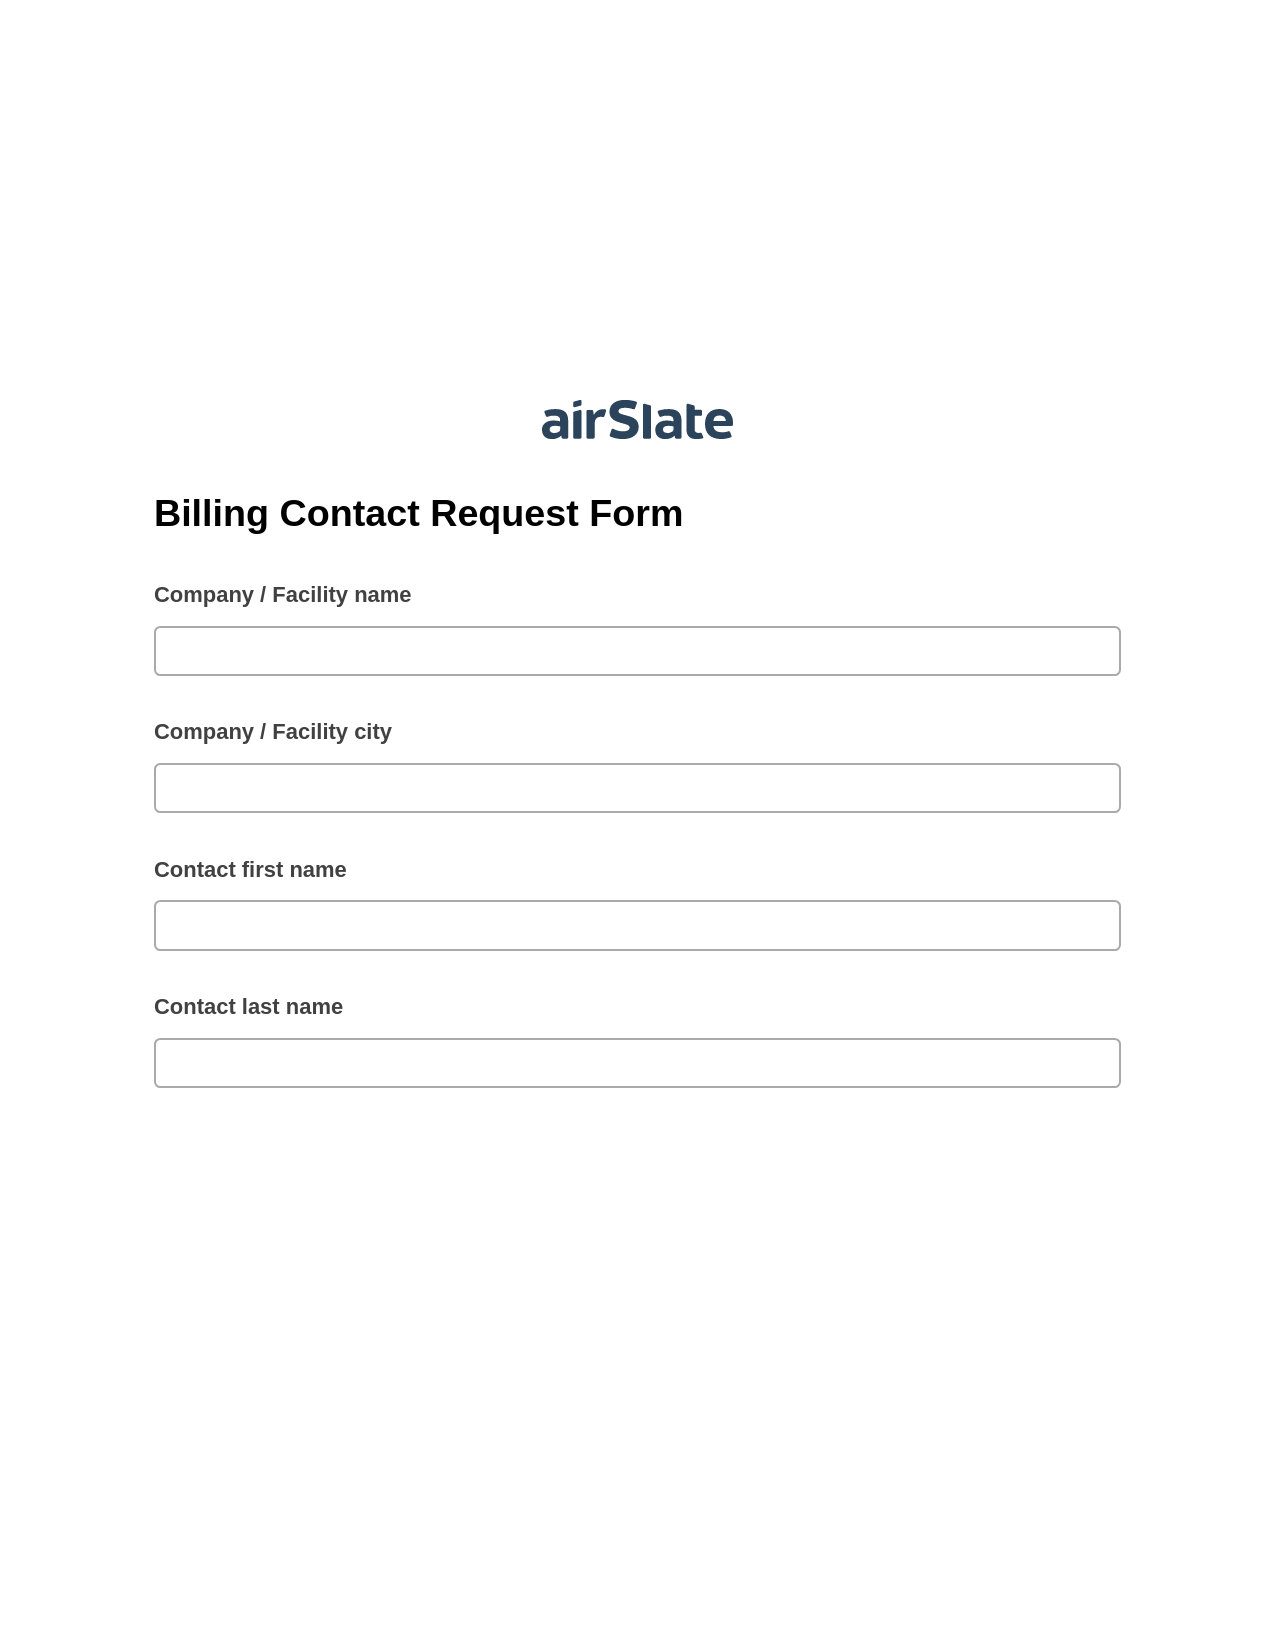 Multirole Billing Contact Request Form Pre-fill from another Slate Bot, Invoke Salesforce Process Bot, Export to Salesforce Bot